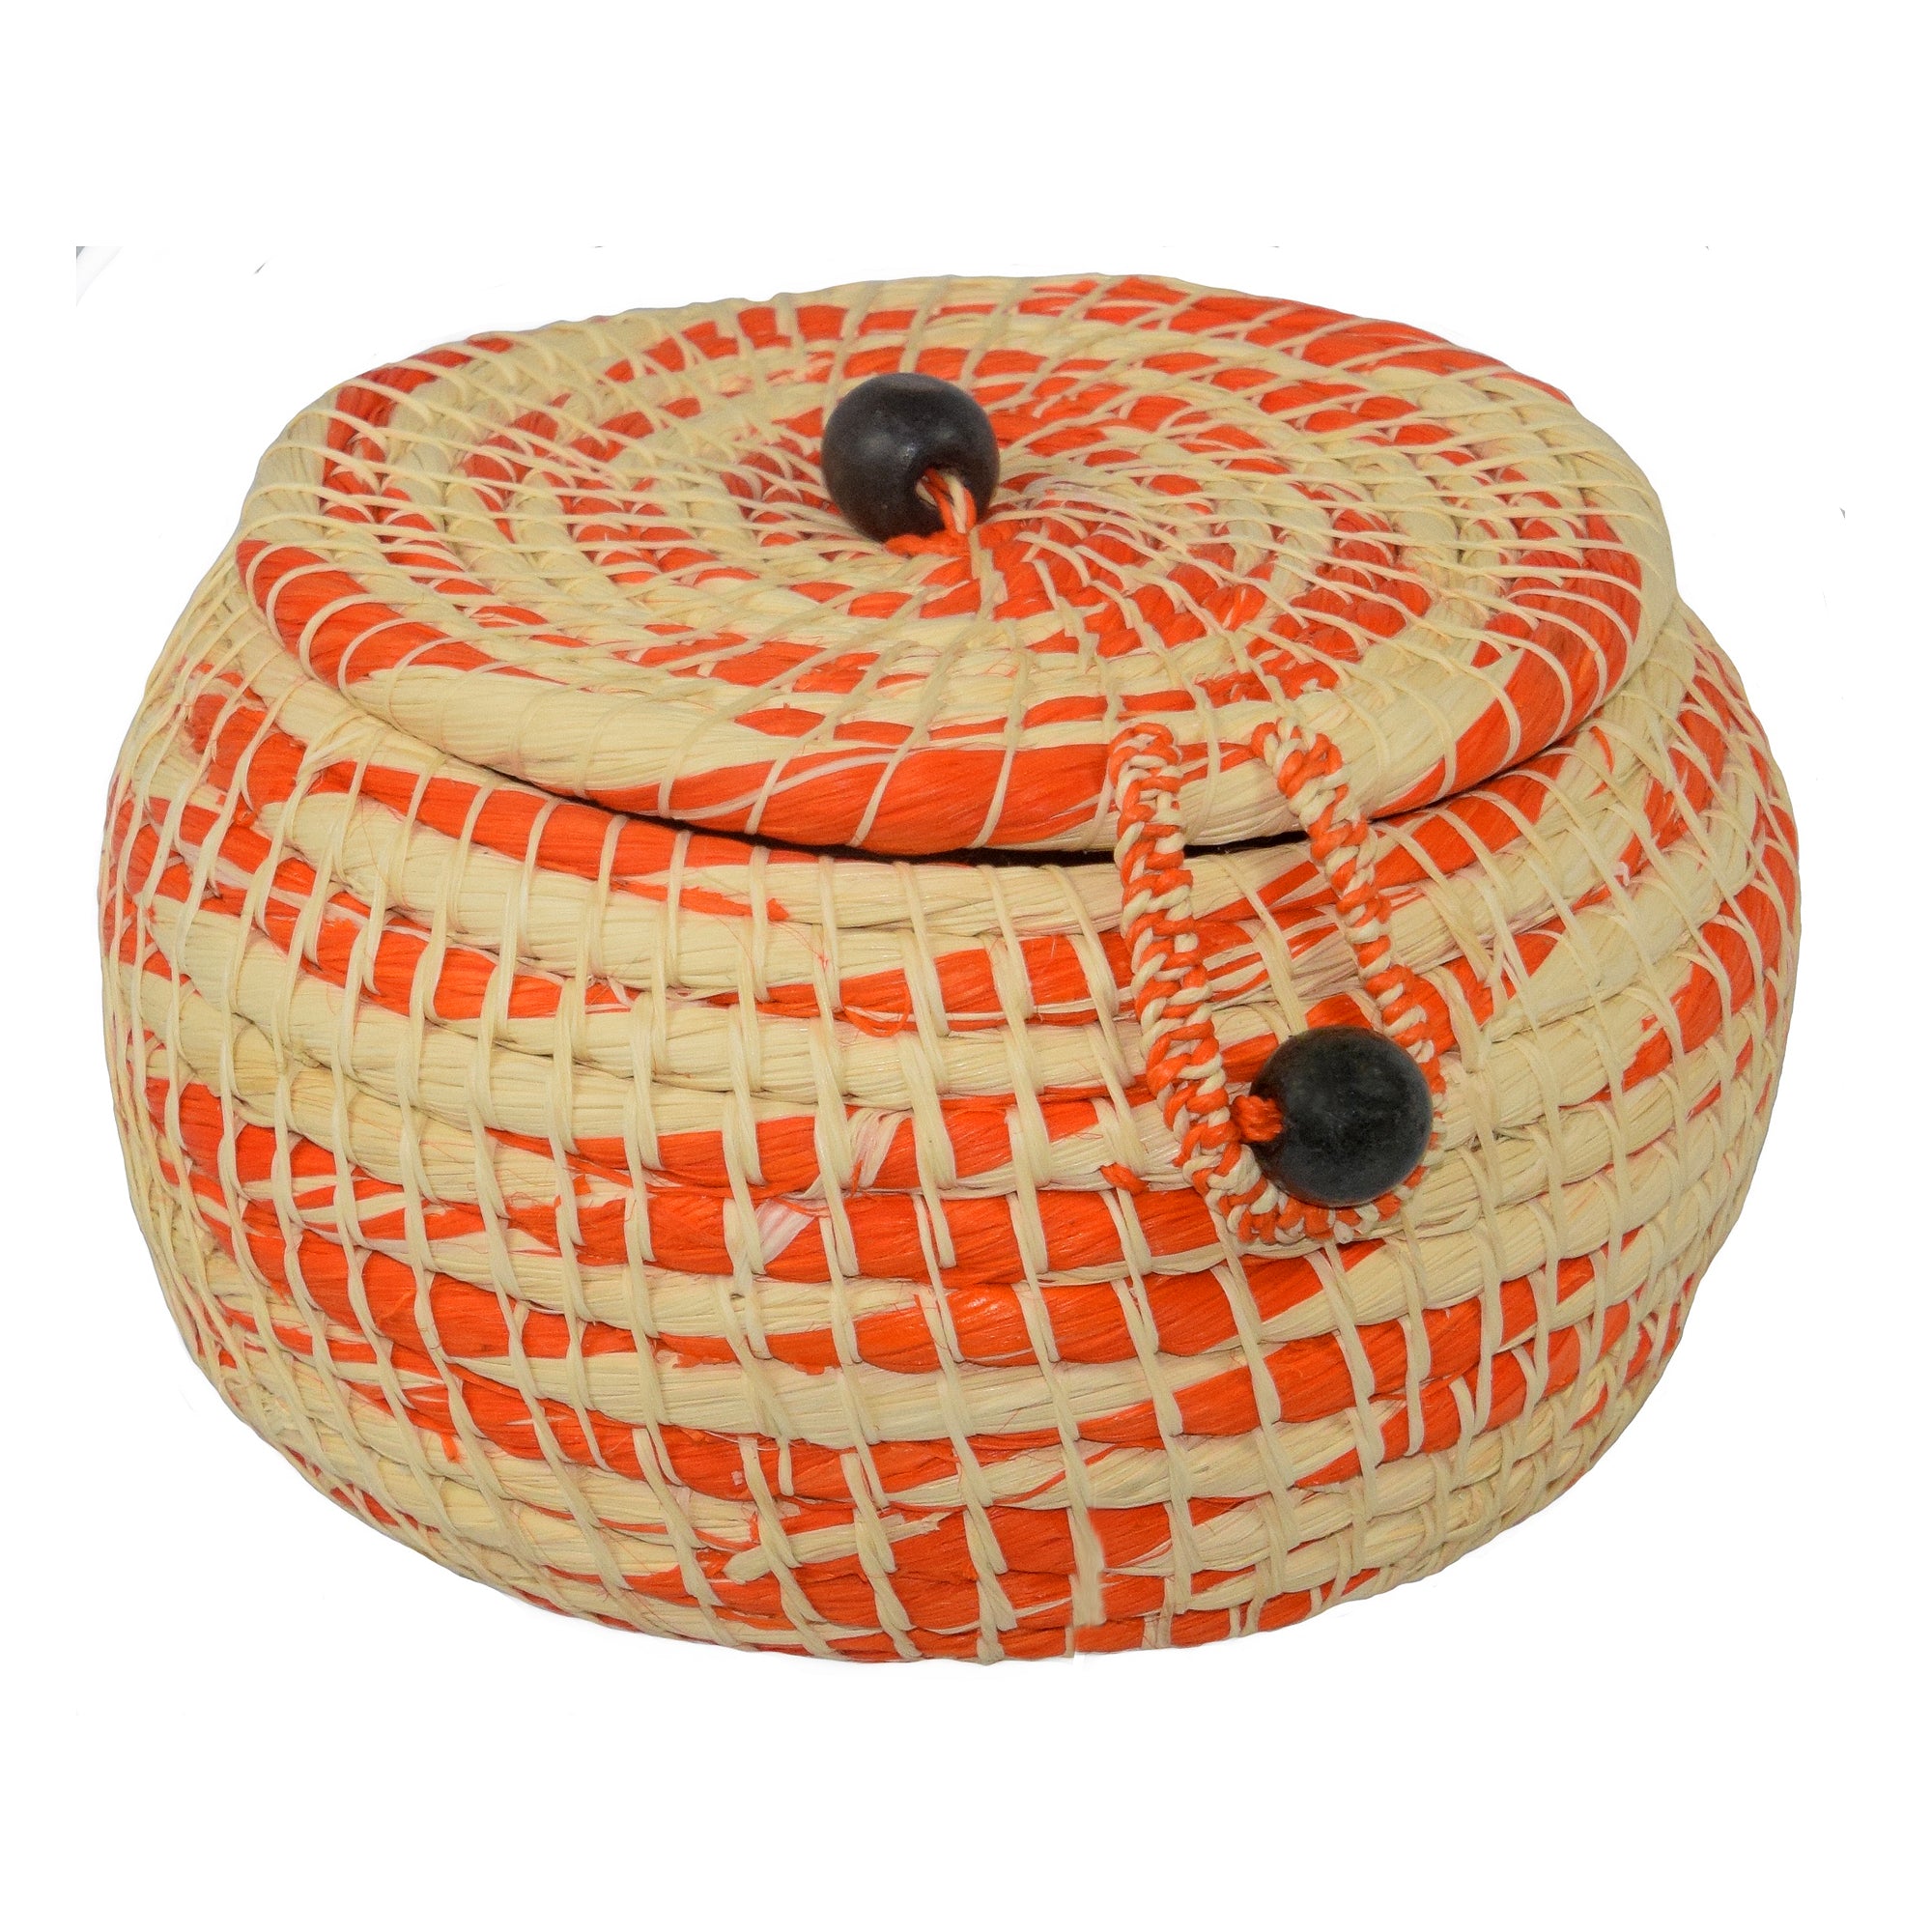 Chambira woven pot with top - white with color swirls- handmade by Peruvian artisan